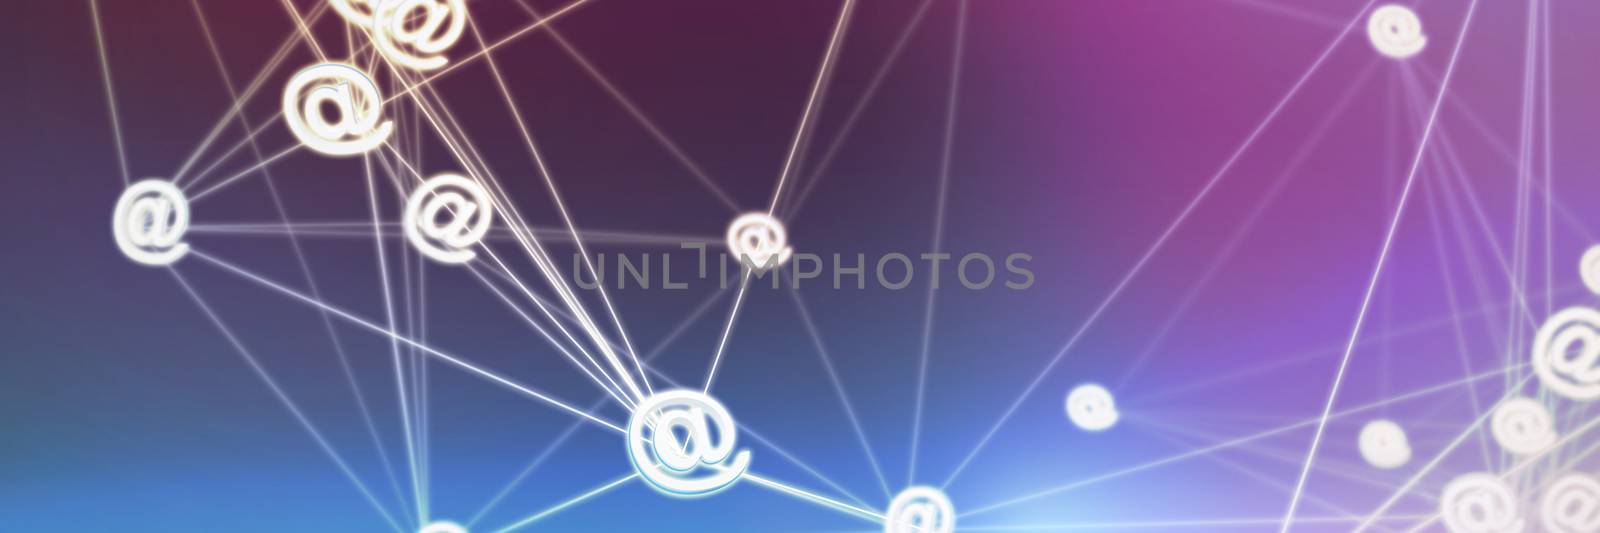 Composite image of abstract image of at email sign by Wavebreakmedia